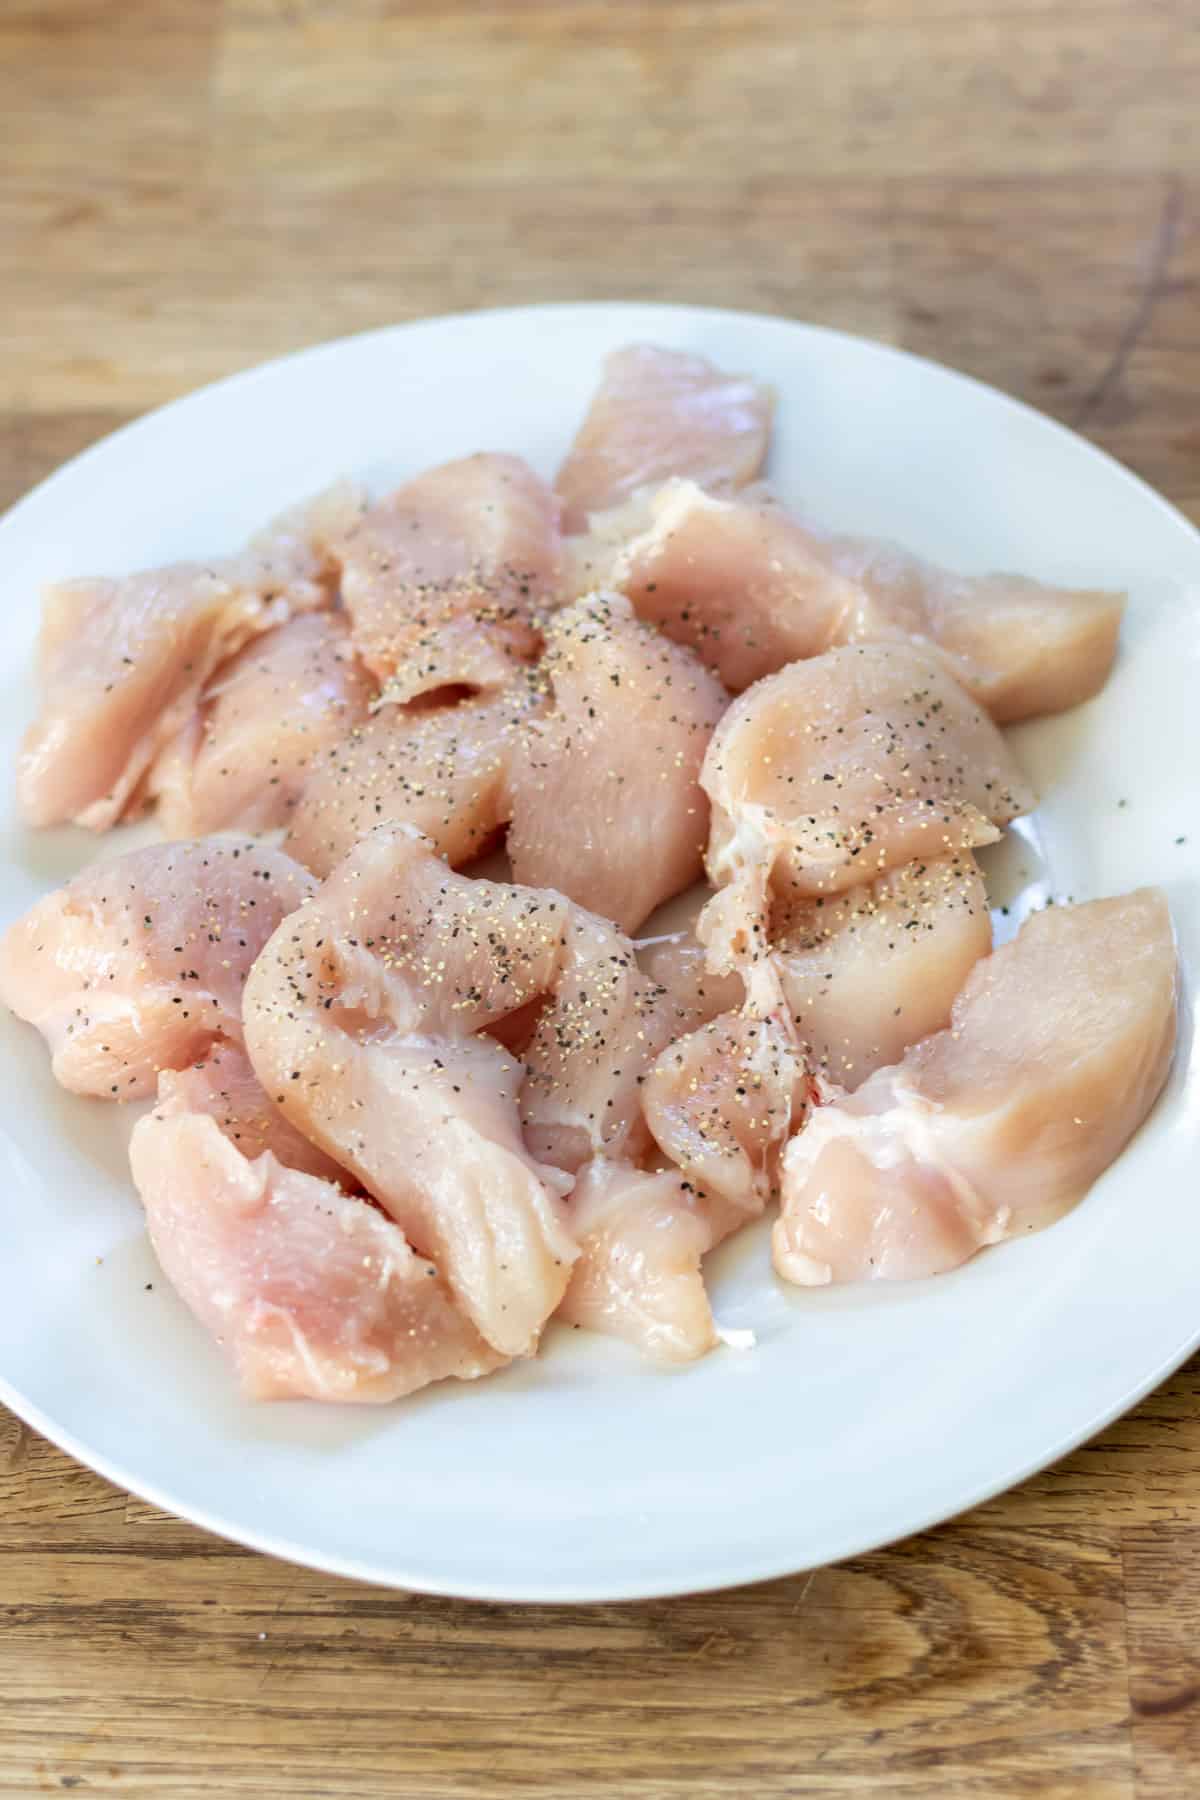 Cutting chicken breasts in to pieces.